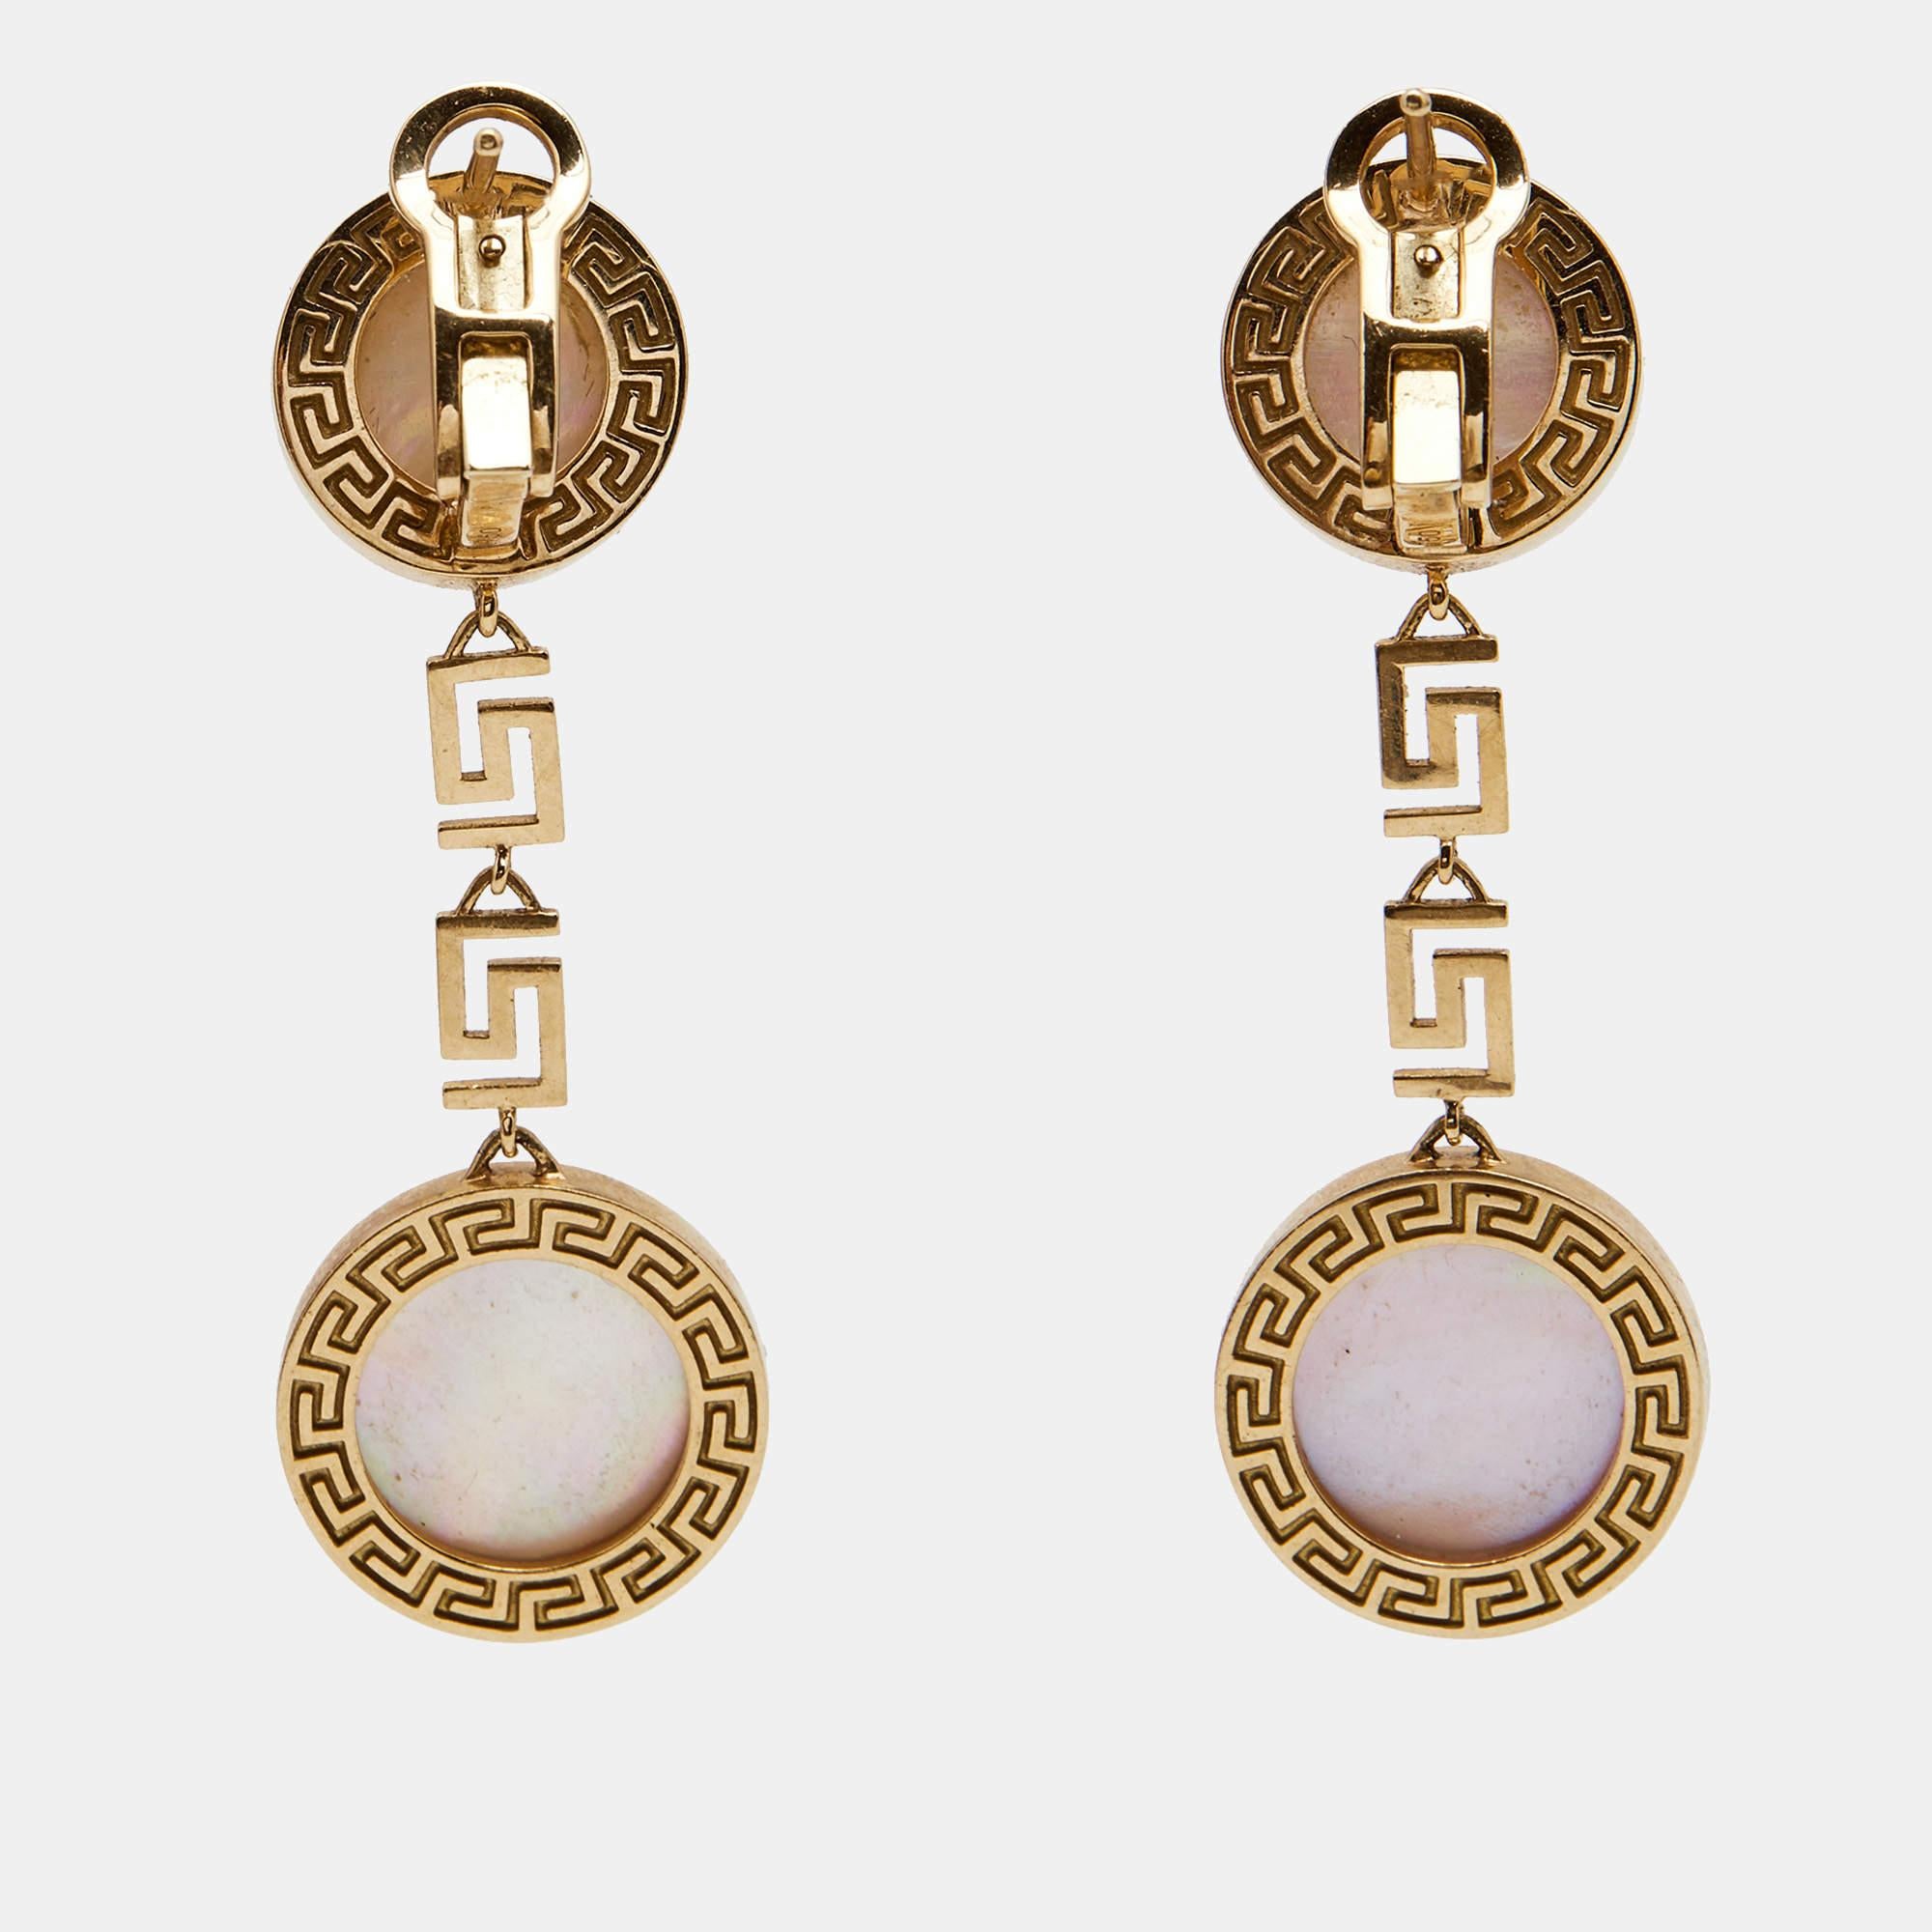 This Versace pair of earrings is a splendid piece of jewelry that you'll find easy to pair, whether with a party/evening outfit or an effortless fall wedding edit. Made of 18k yellow gold, the earrings carry two circular charms set with mother of